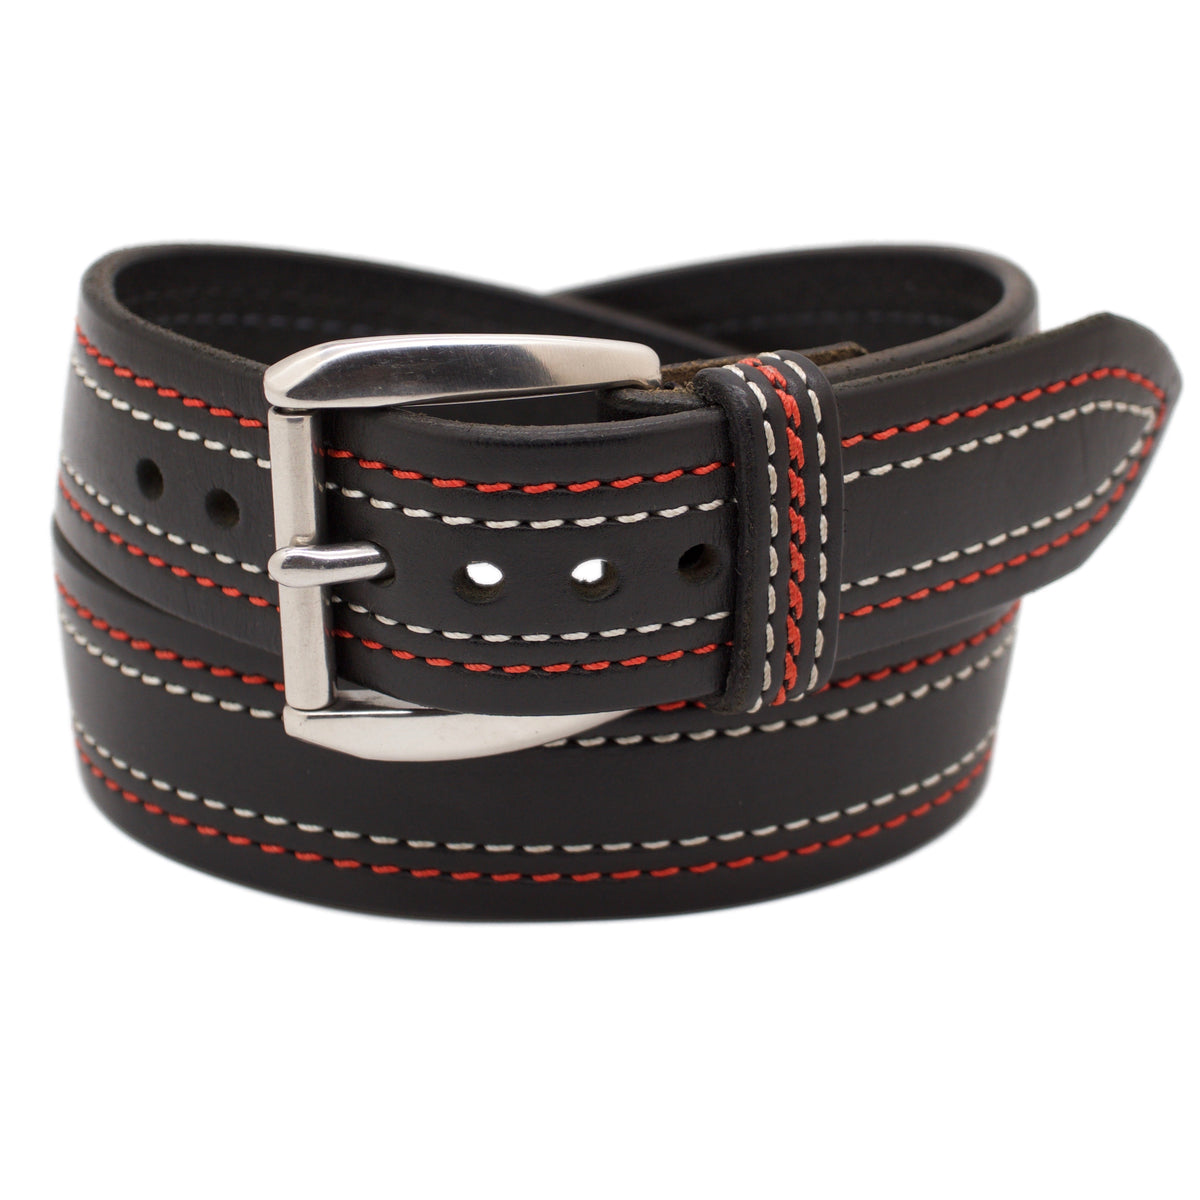 The ENZO WIDE 1.75 Leather Belt